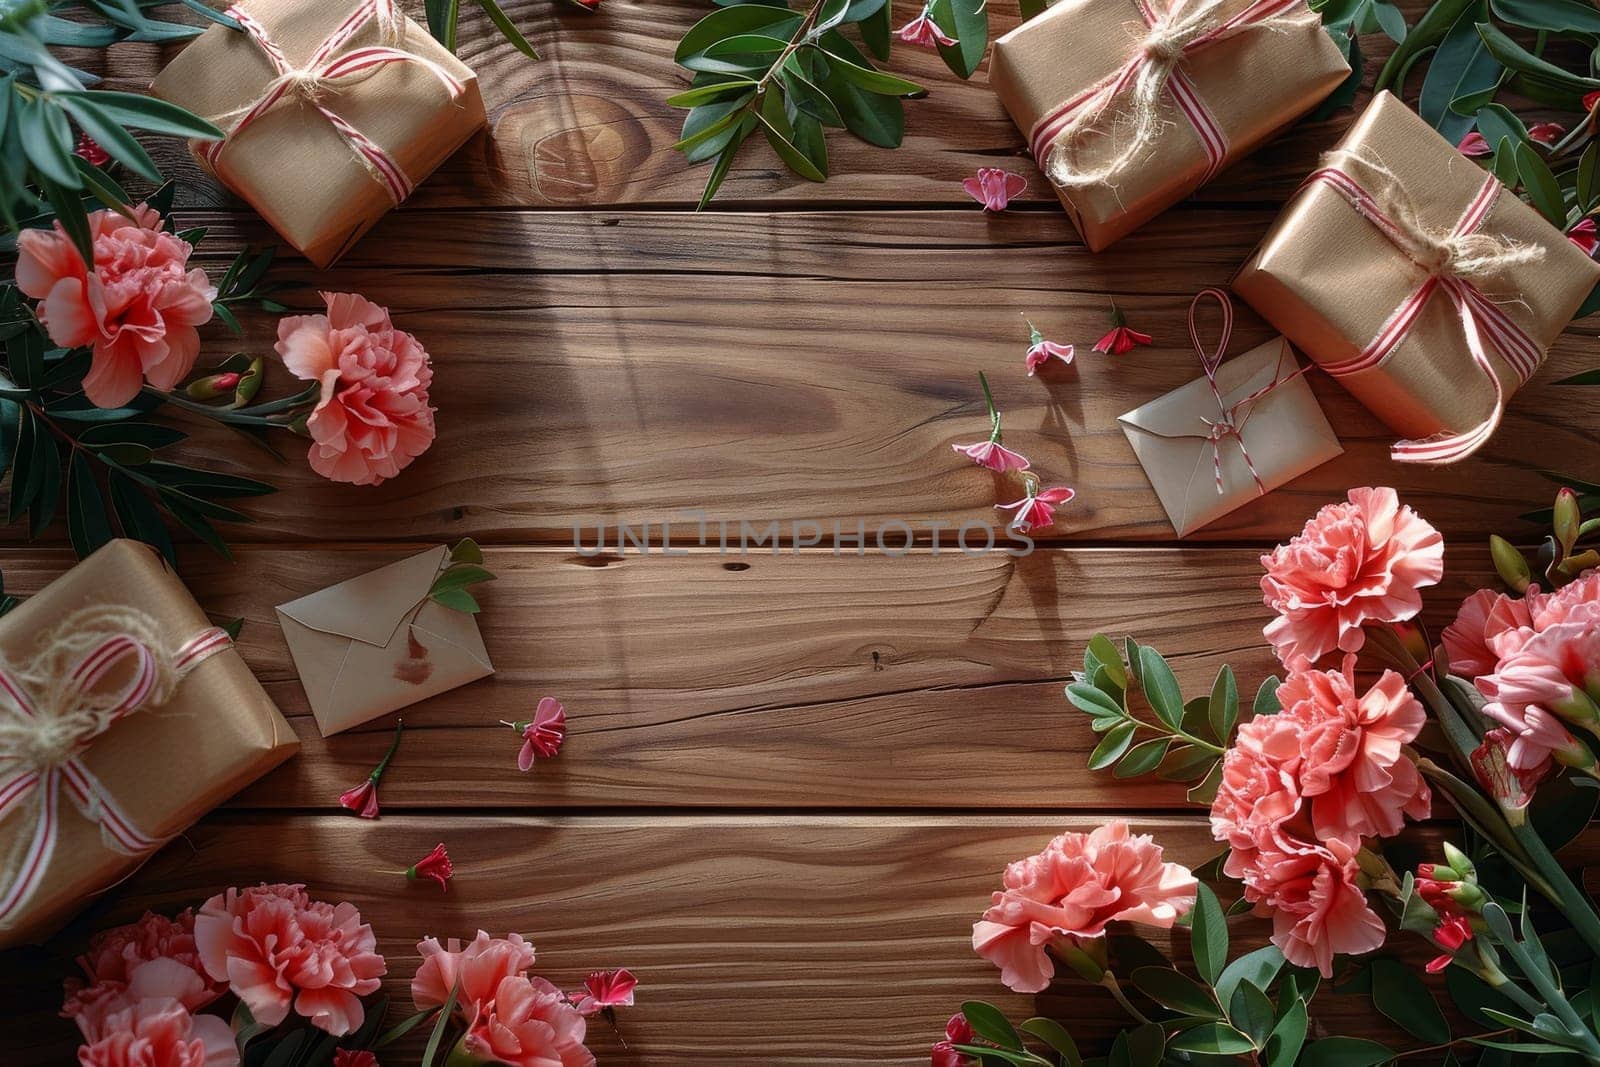 A white background with pink flowers and brown boxes. The boxes are wrapped in pink ribbon and are placed on the table